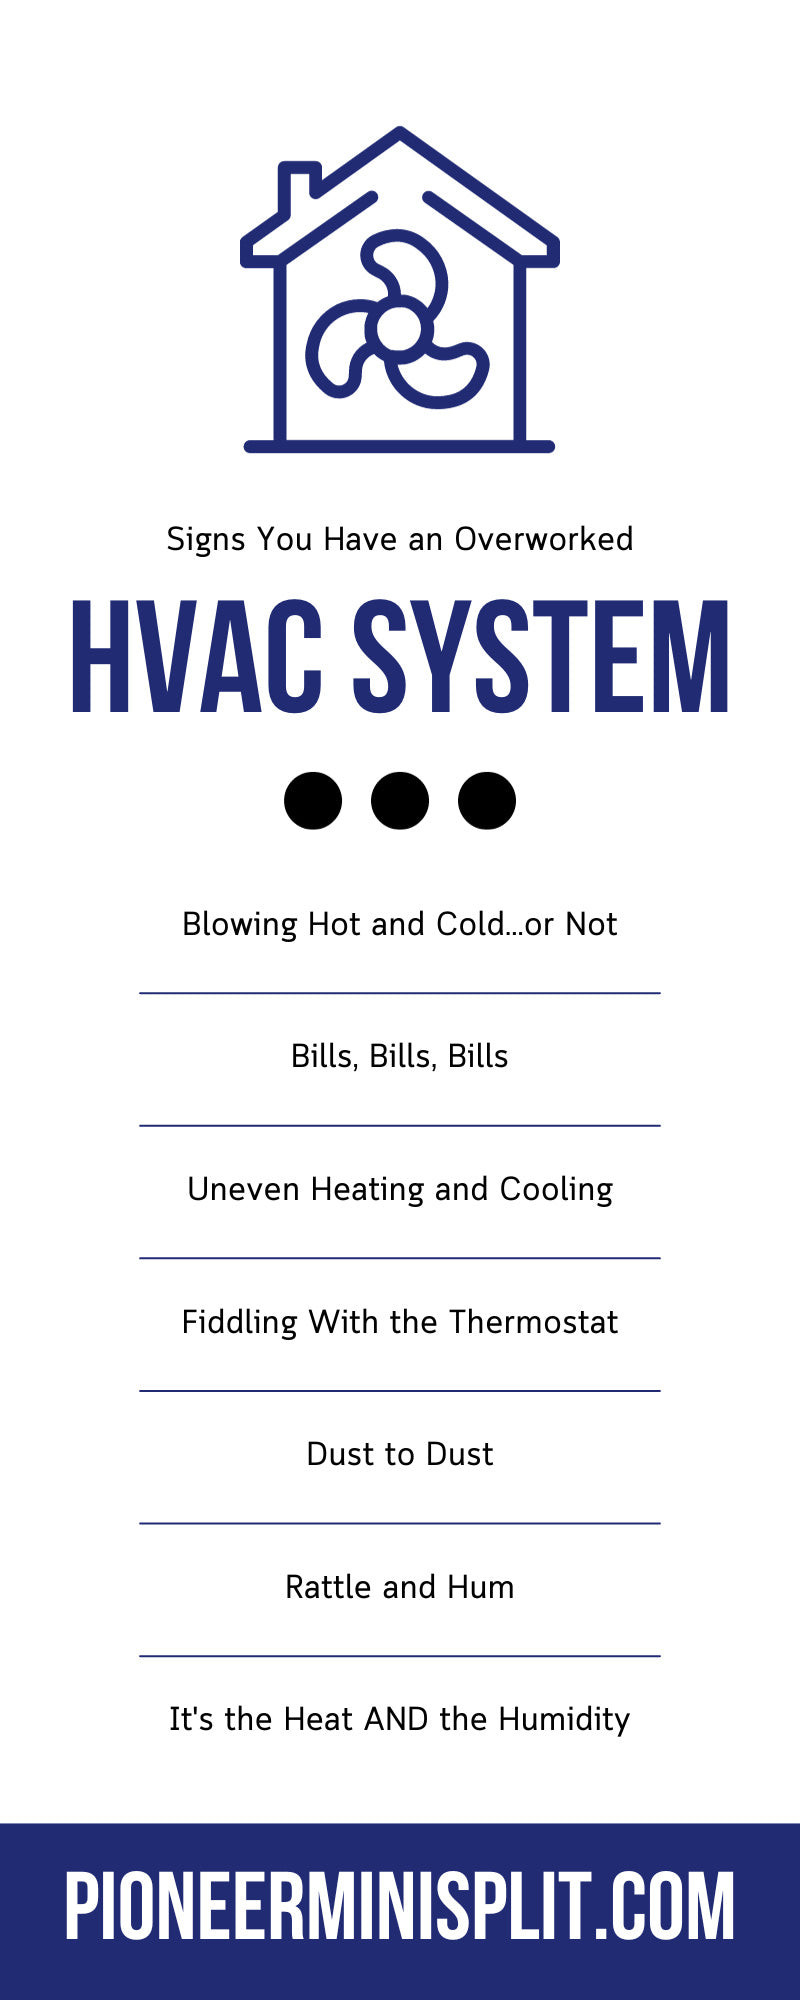 9 Signs You Have an Overworked HVAC System